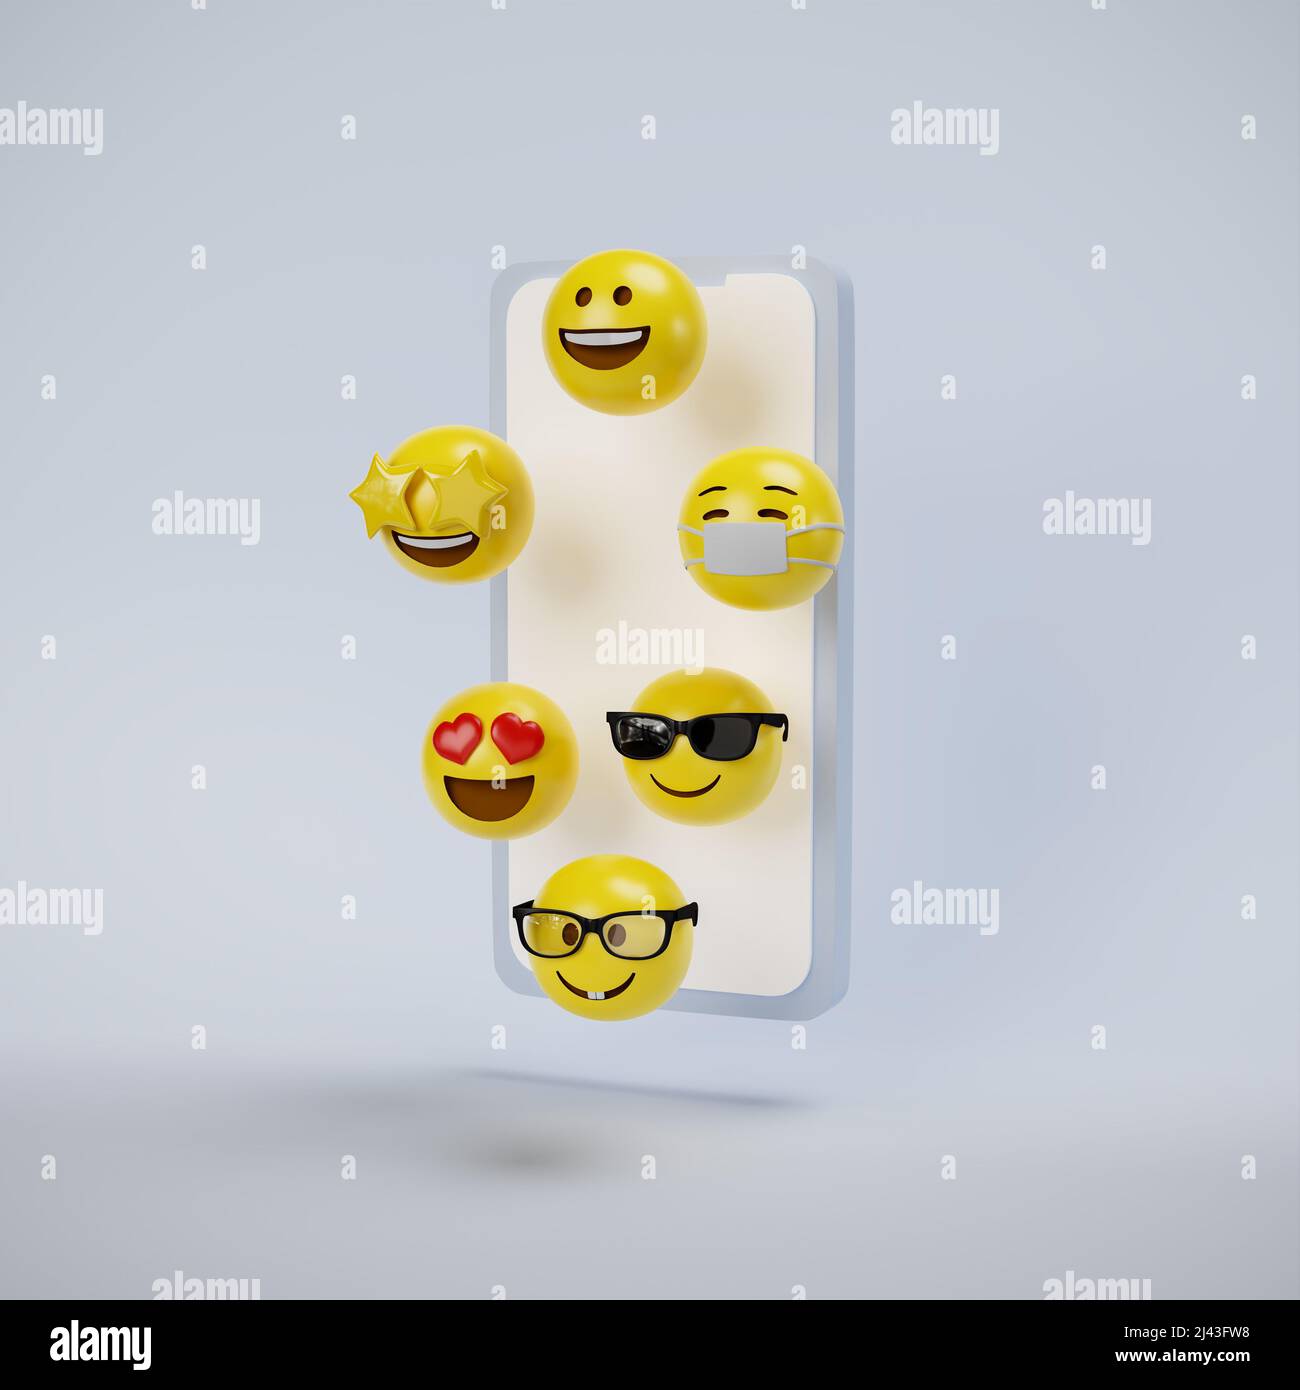 Cartoon style 3d image of emojis escaping a smartphone Stock Photo